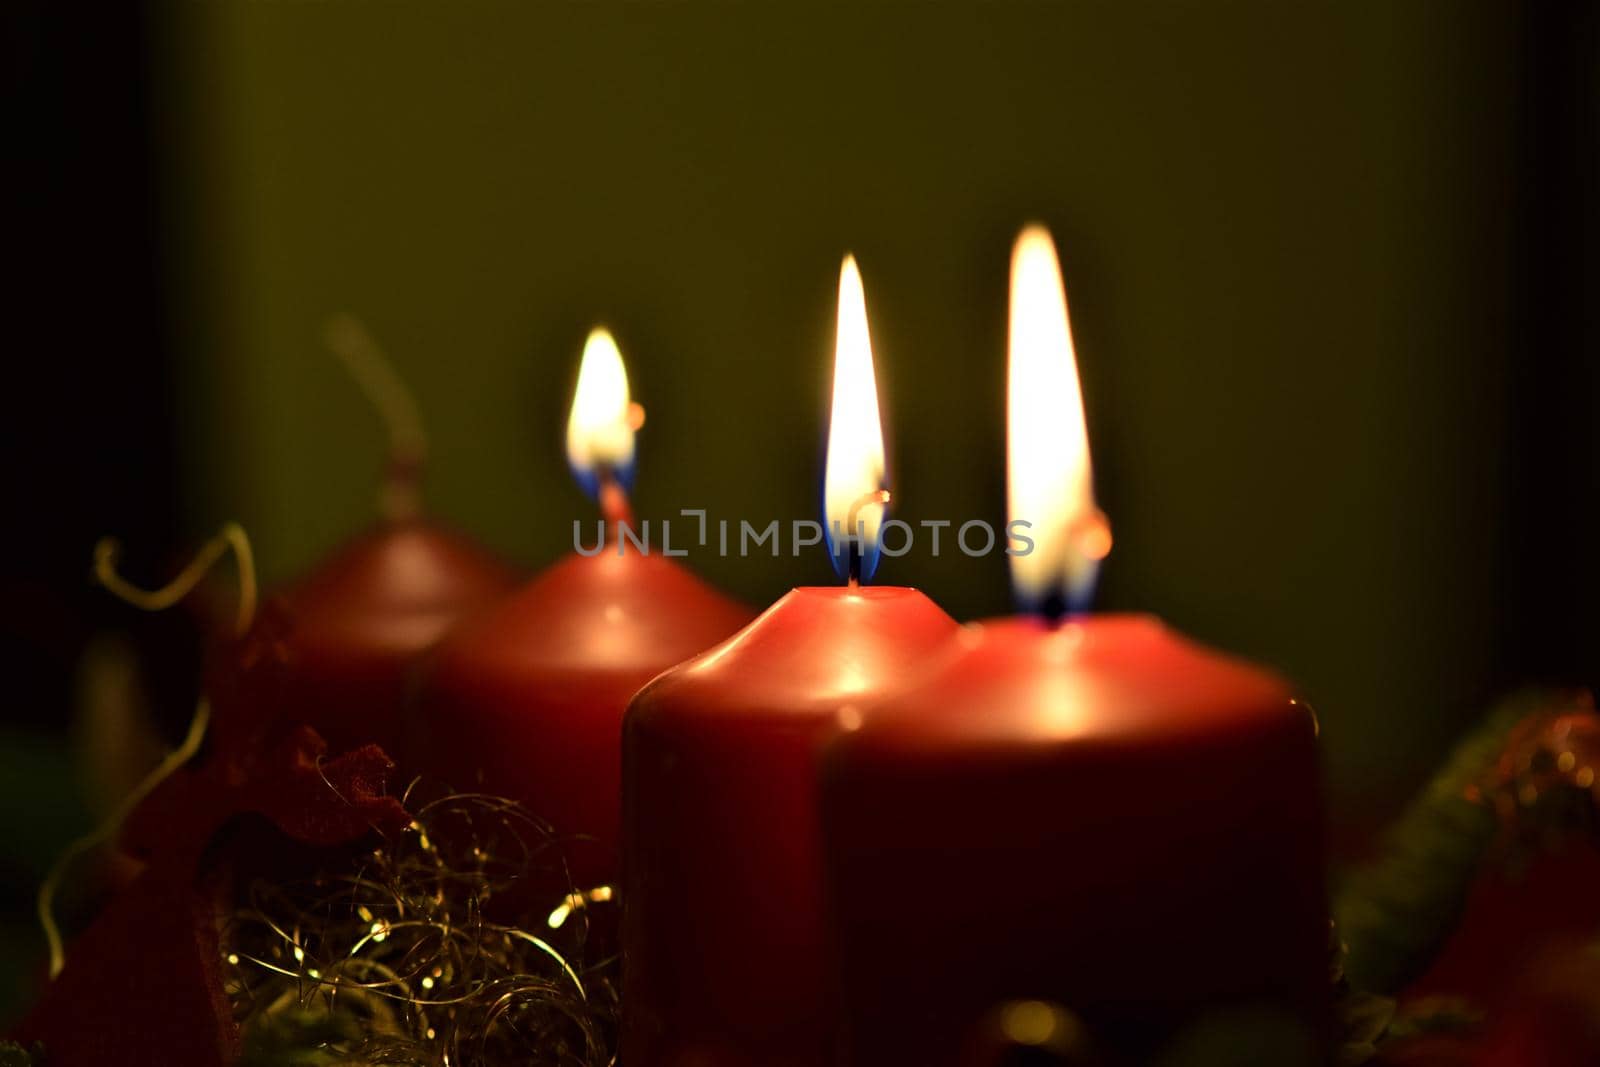 close-up of an Advent arrangement with 3 burning candles